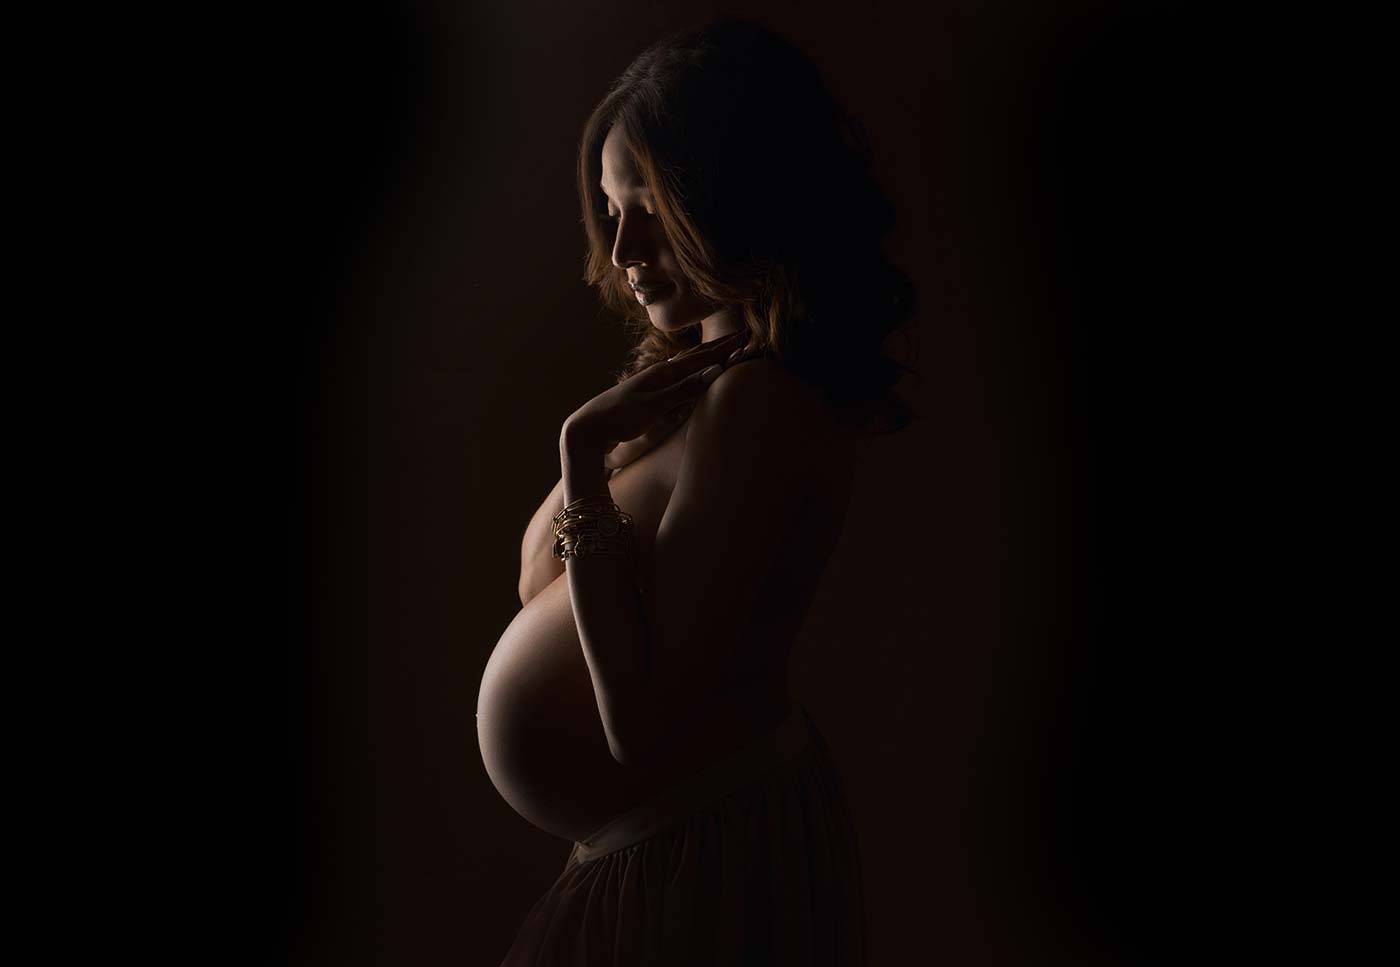 Silhouette of a pregnant woman. Her belly is tastefully lit, showing a crescent shape. Her eyes are closed and her expression is calm.